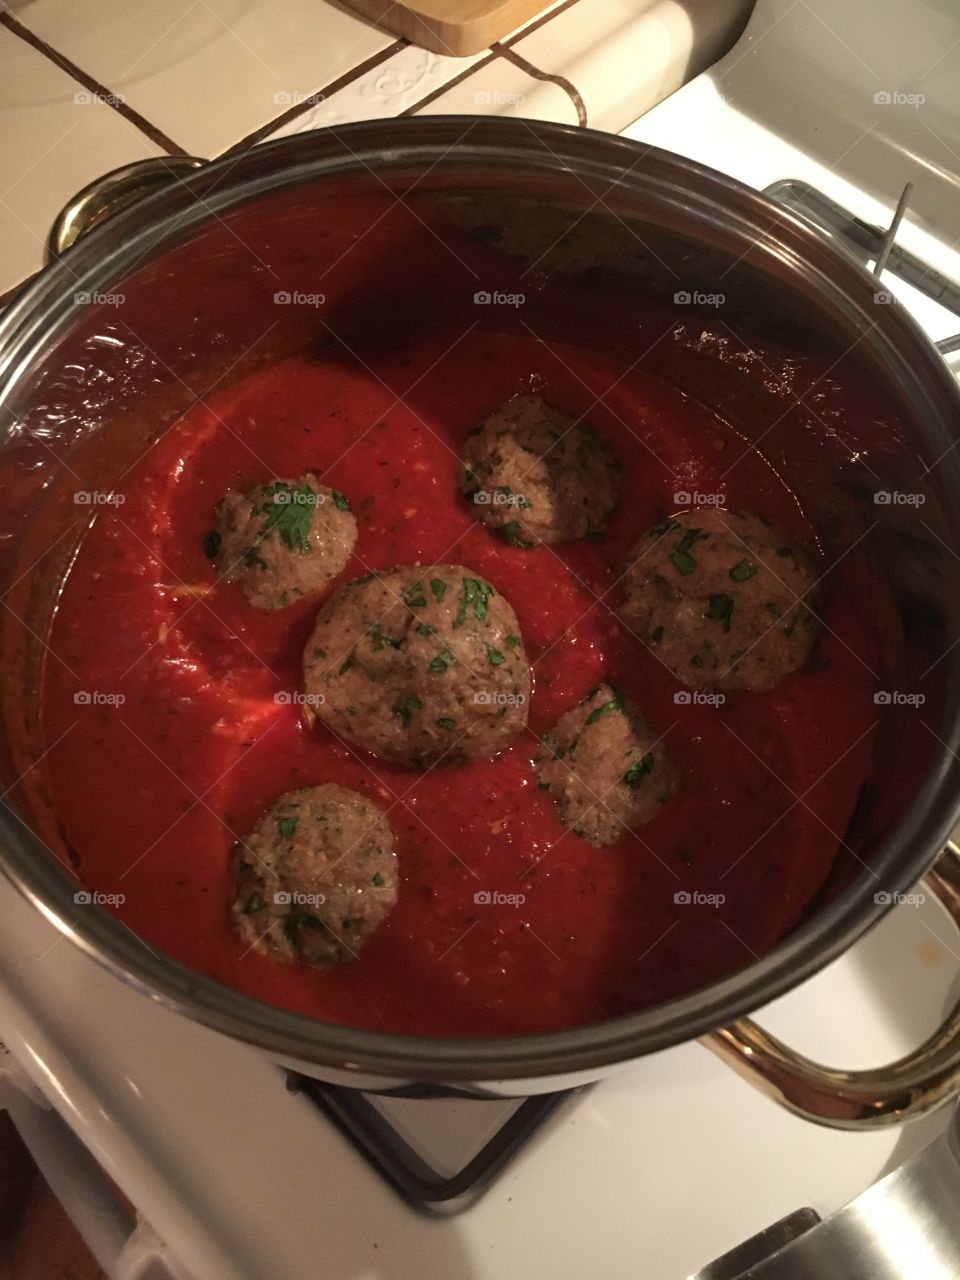 Homemade meatballs with the Mom. Delicious, indulgent, picturesque upon completion 